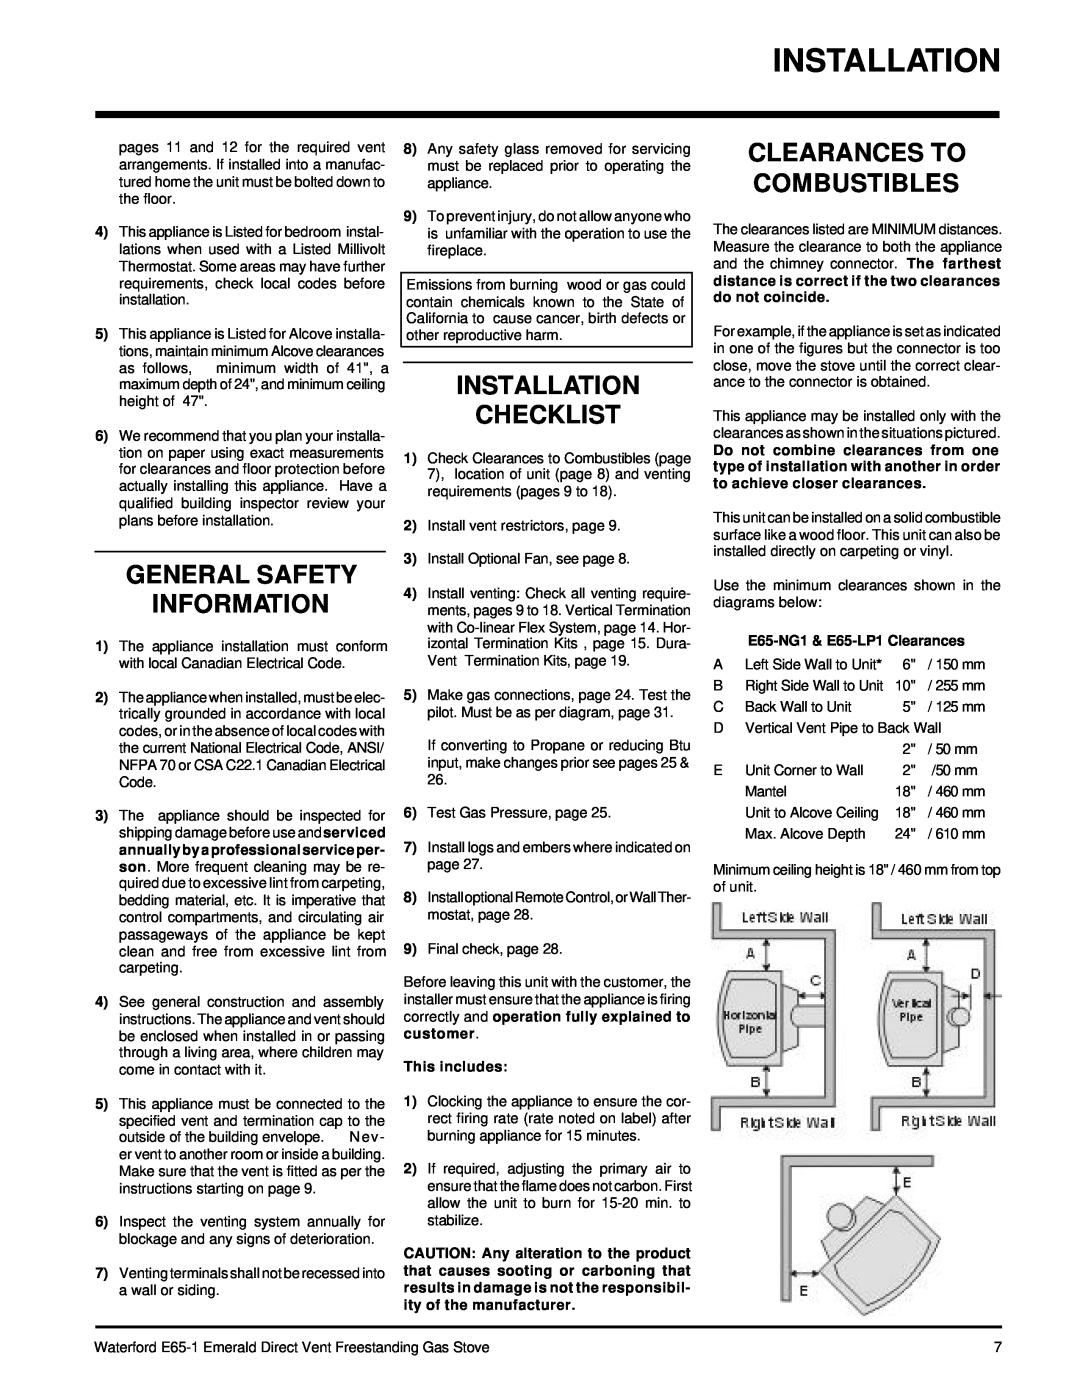 Waterford Appliances E65-LP1 General Safety Information, Installation Checklist, Clearances To Combustibles, This includes 